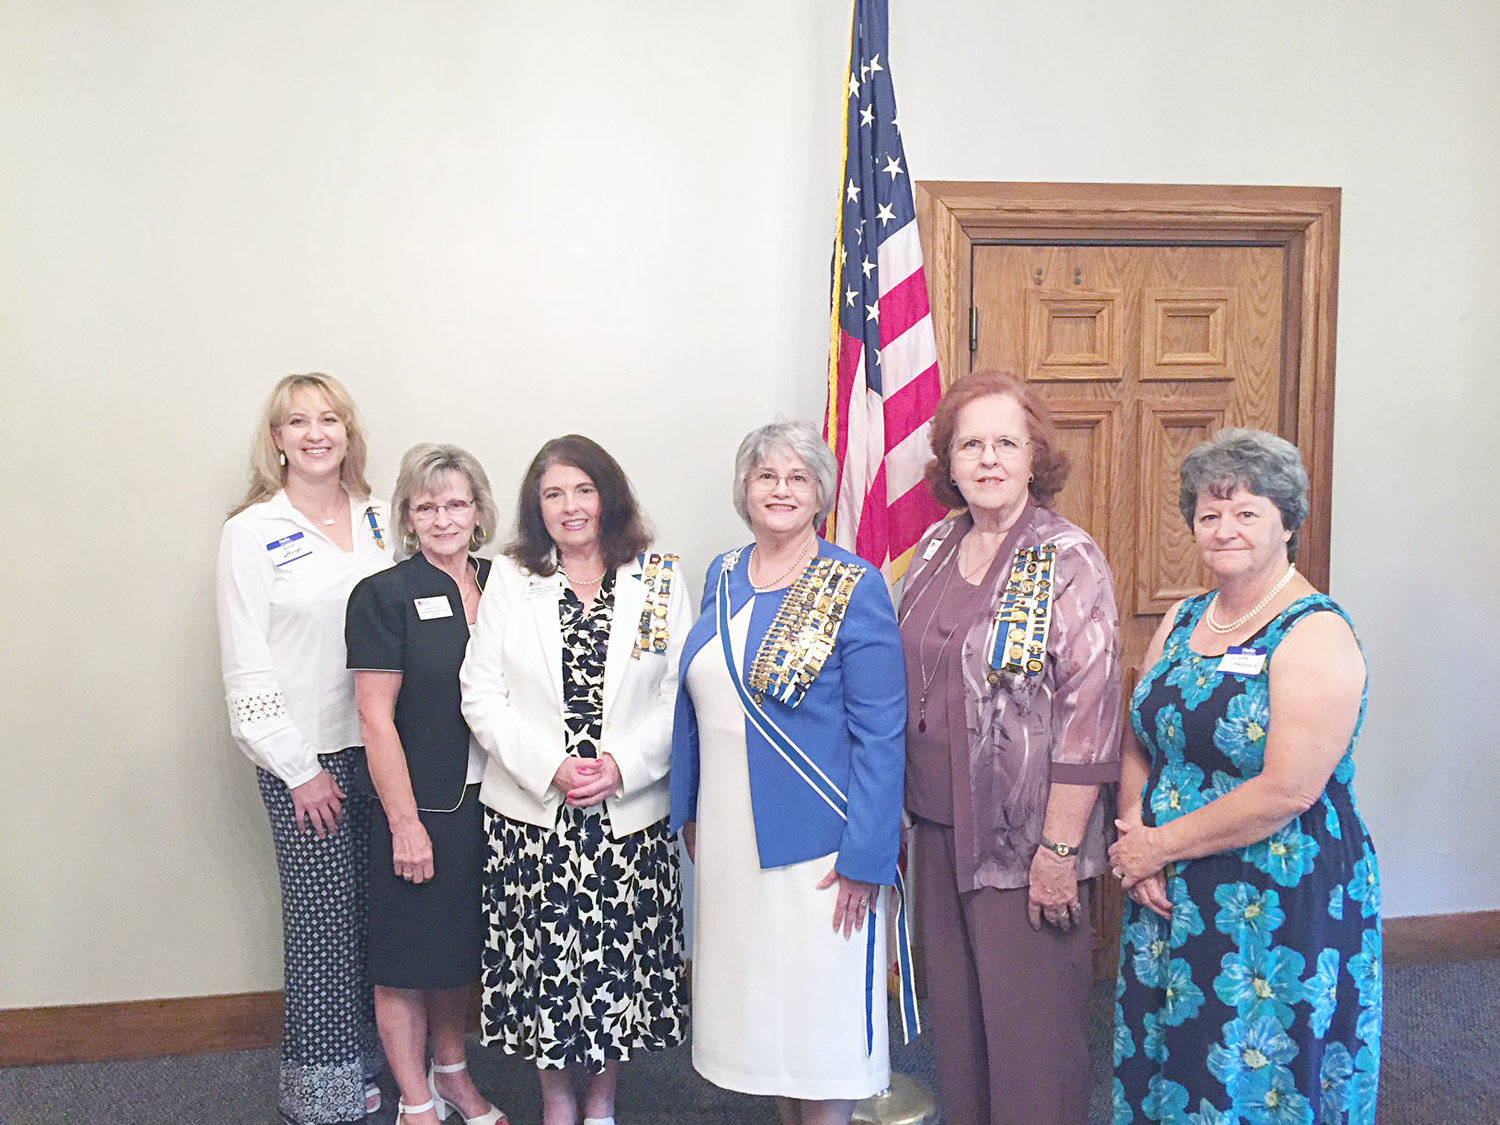 From left, Carrie Shough, Susan Few, Barbara Gillies, Madam State Regent Susan Tillman, Mary Sockwell and Linda Haddock of the Elizabeth Denton English Chapter.